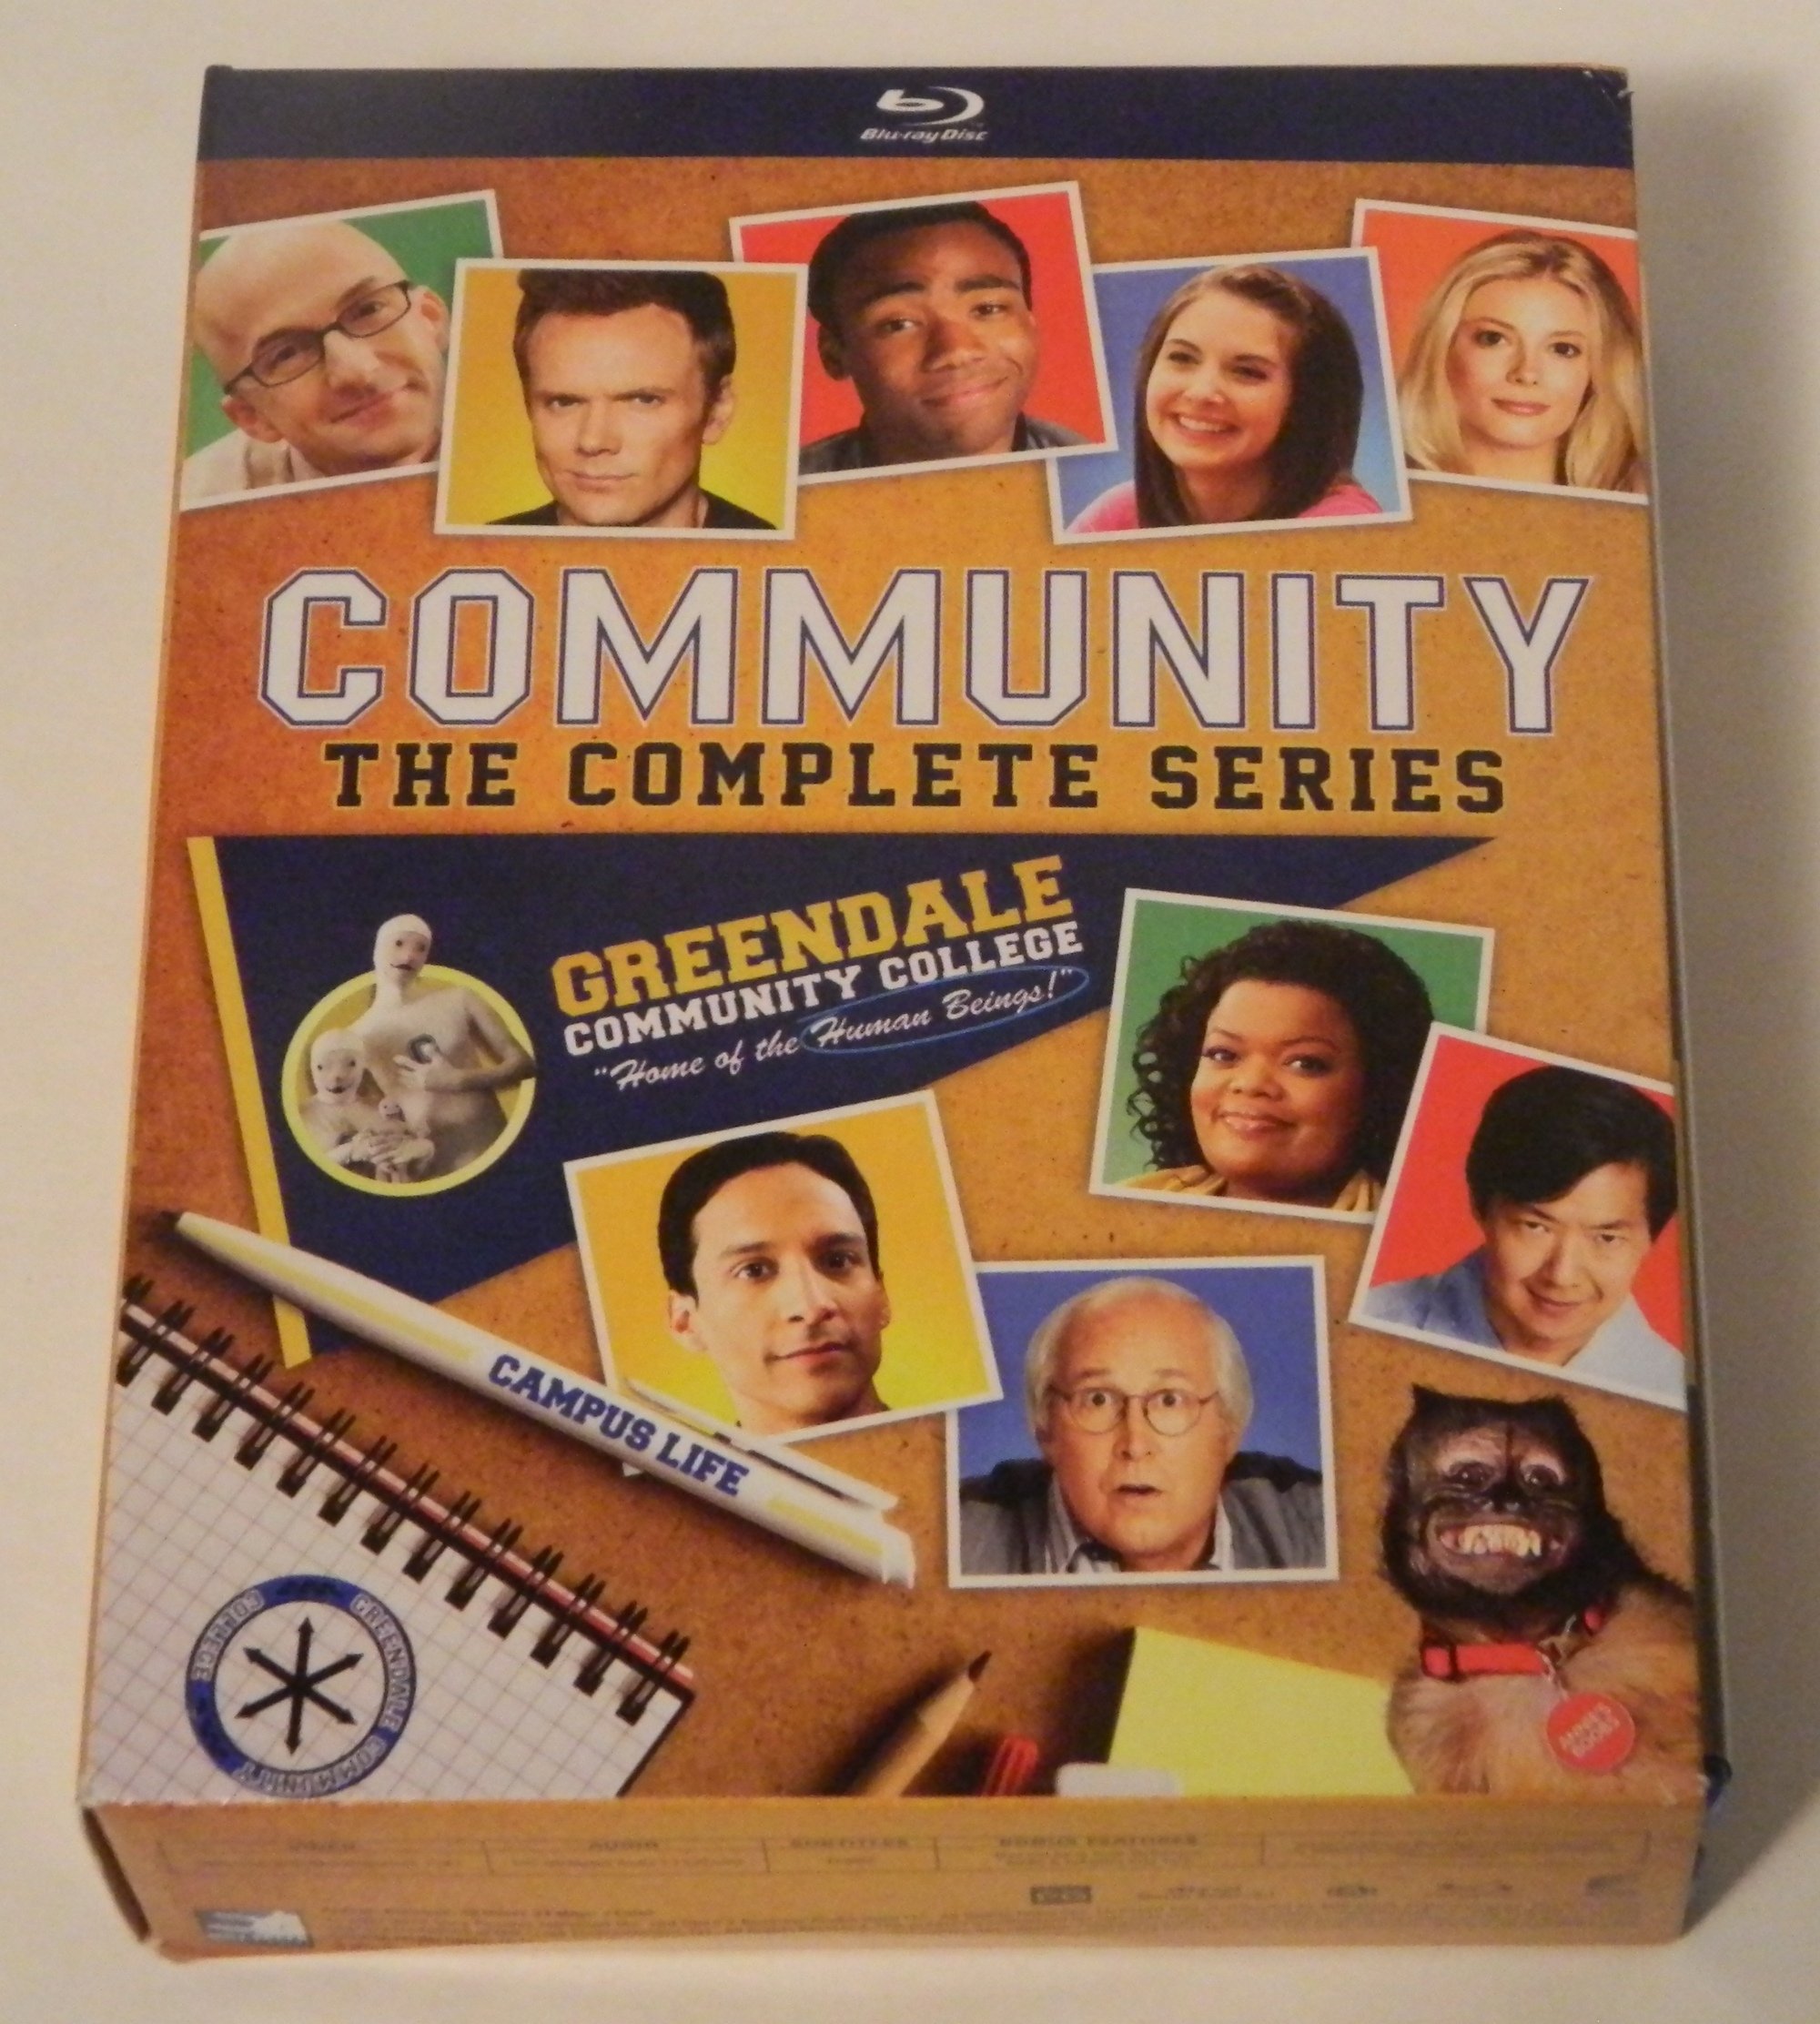 Community: The Complete Series Blu-ray Review